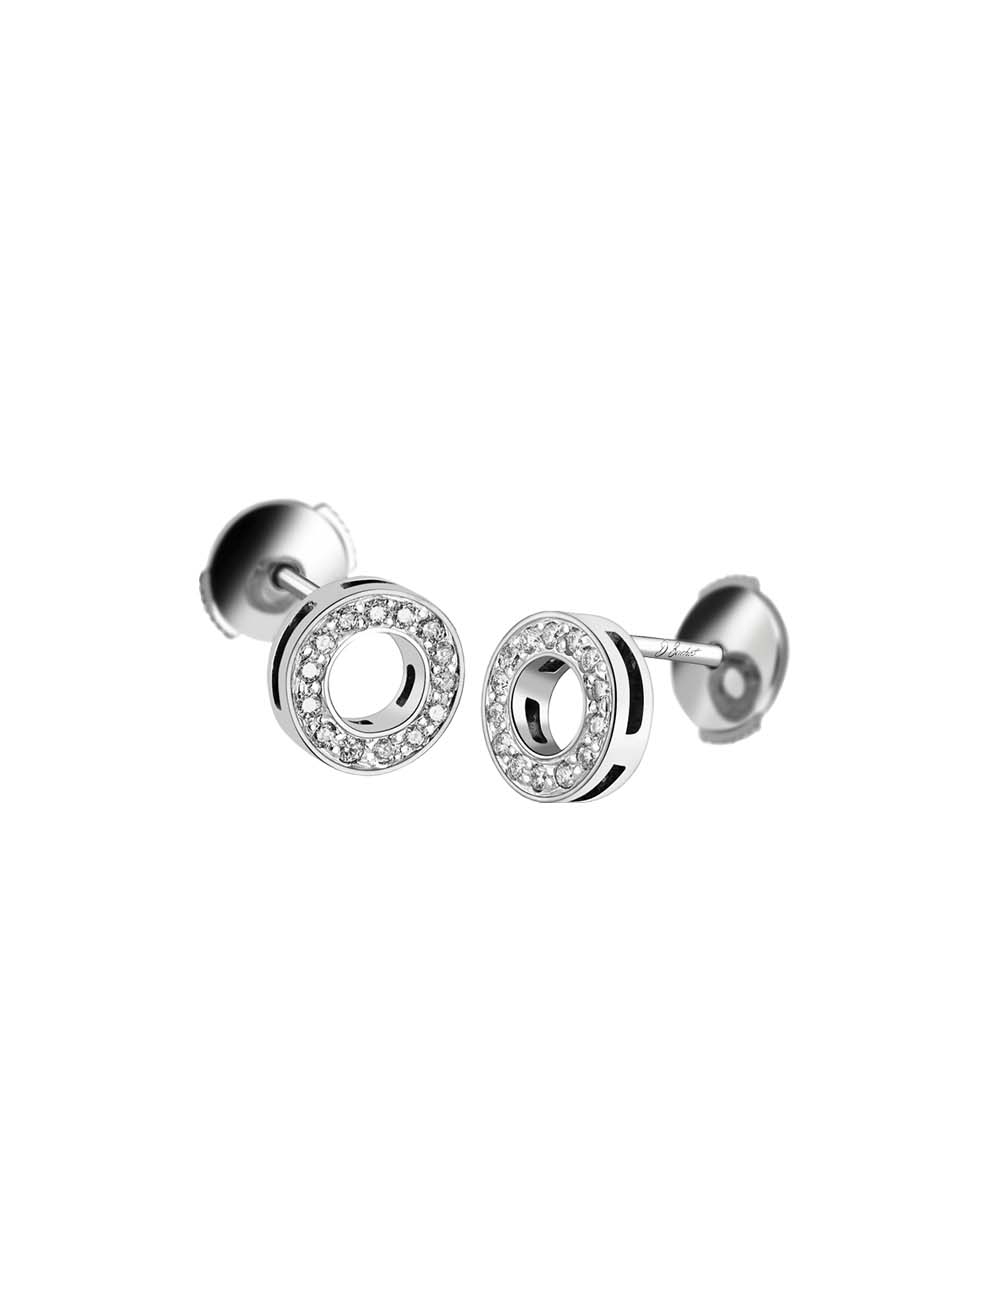 Women's circle earrings in 18k gold and white diamonds